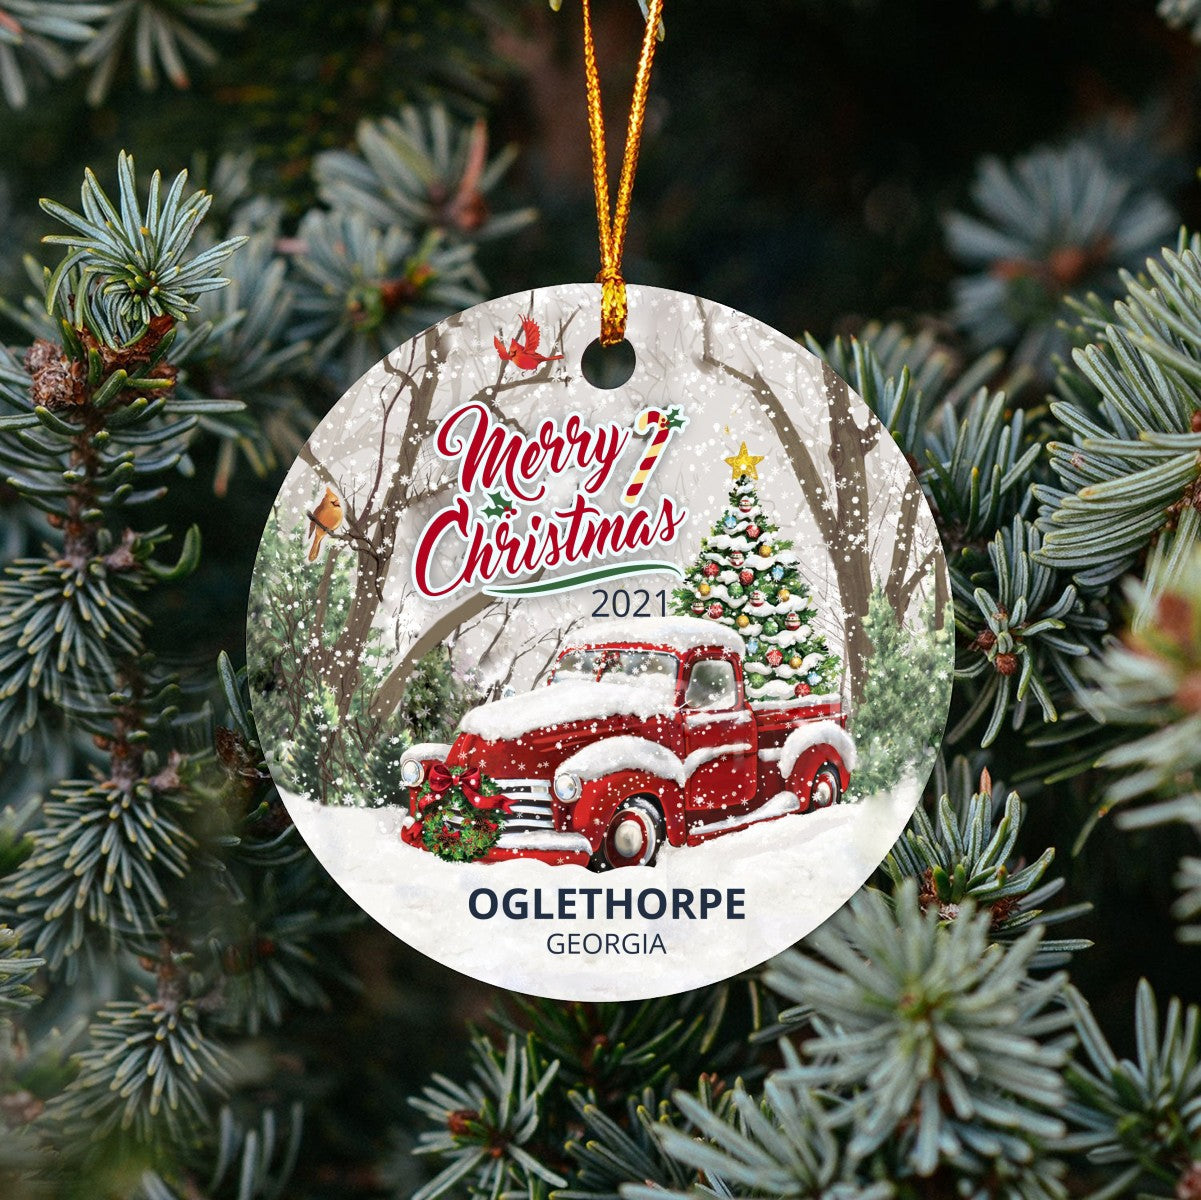 Christmas Tree Ornaments Oglethorpe - Ornament With Name City, State Oglethorpe Georgia GA Ornament - Red Truck Xmas Ornaments 3'' Plastic Gift For Family, Friend And Housewarming